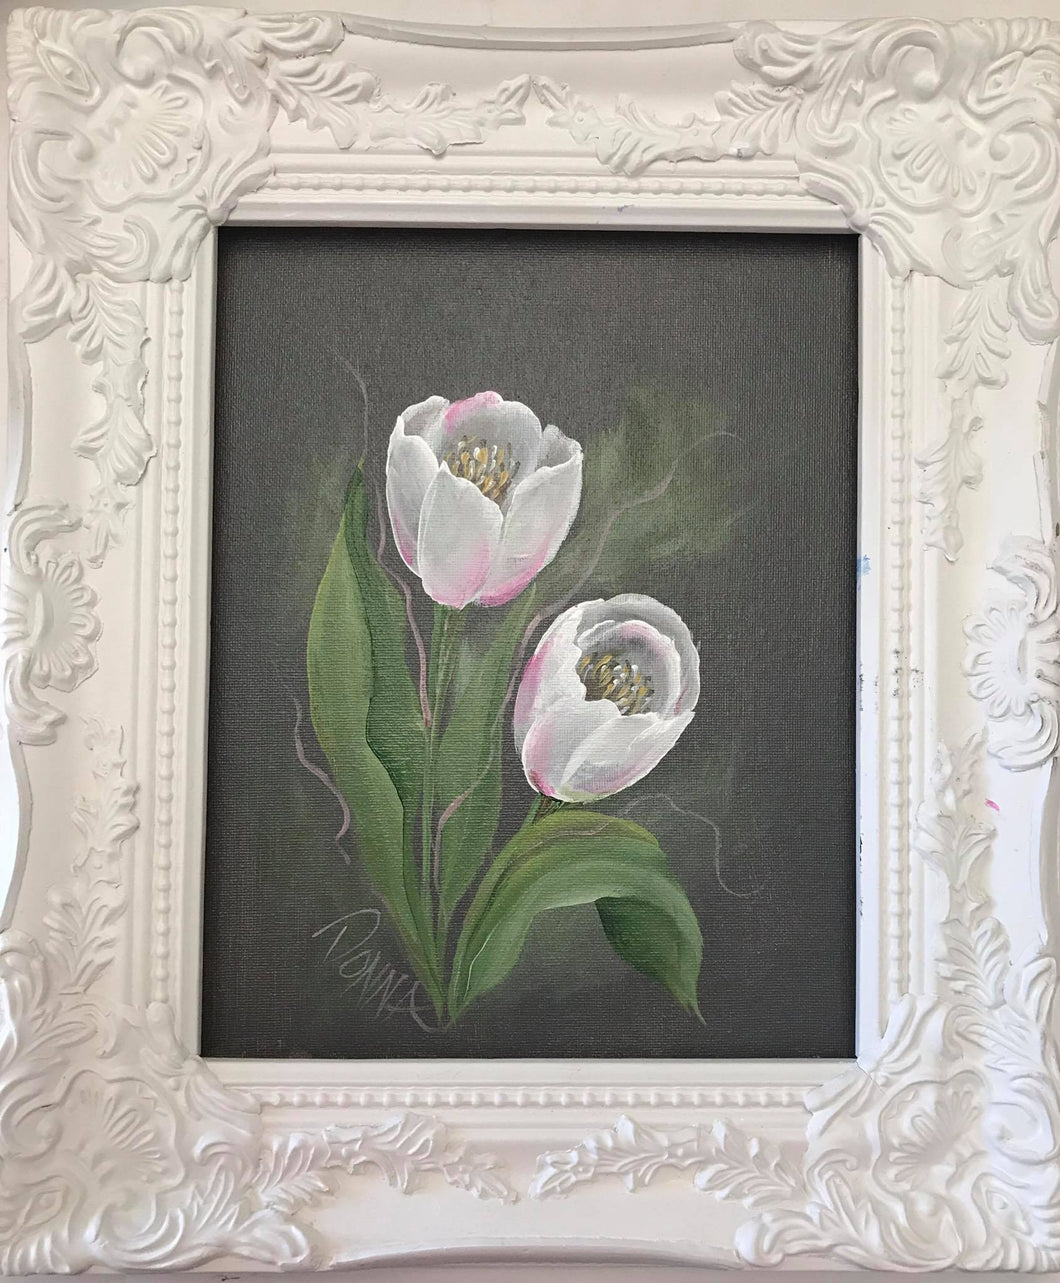 Flowers in White Series - Tulips Downloadable Video Lesson